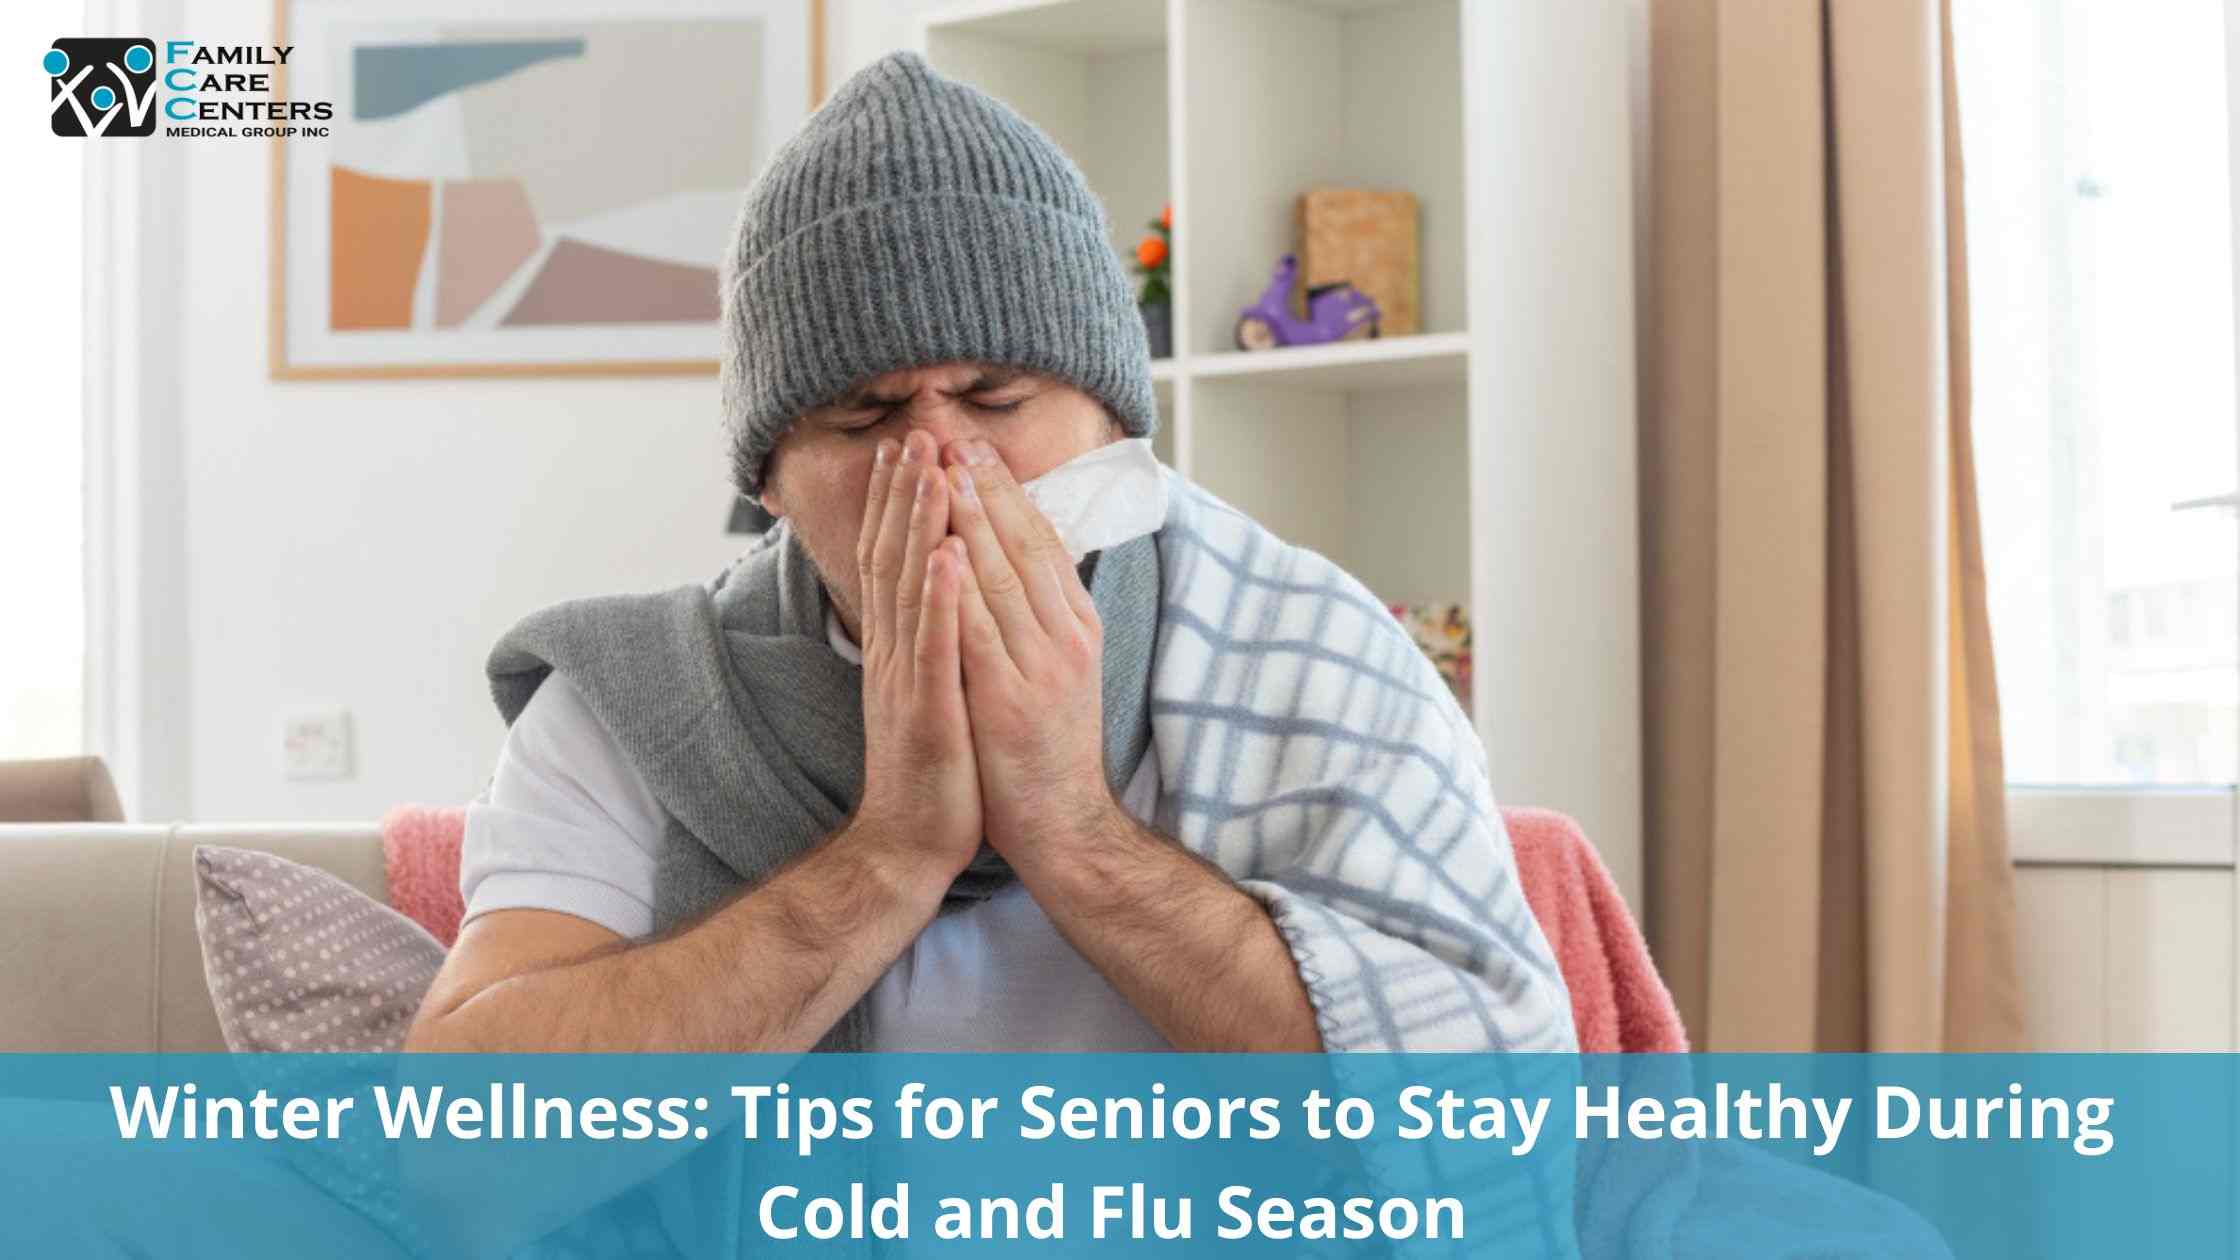 Ways for seniors to remain active during winter - Mayo Clinic Health System